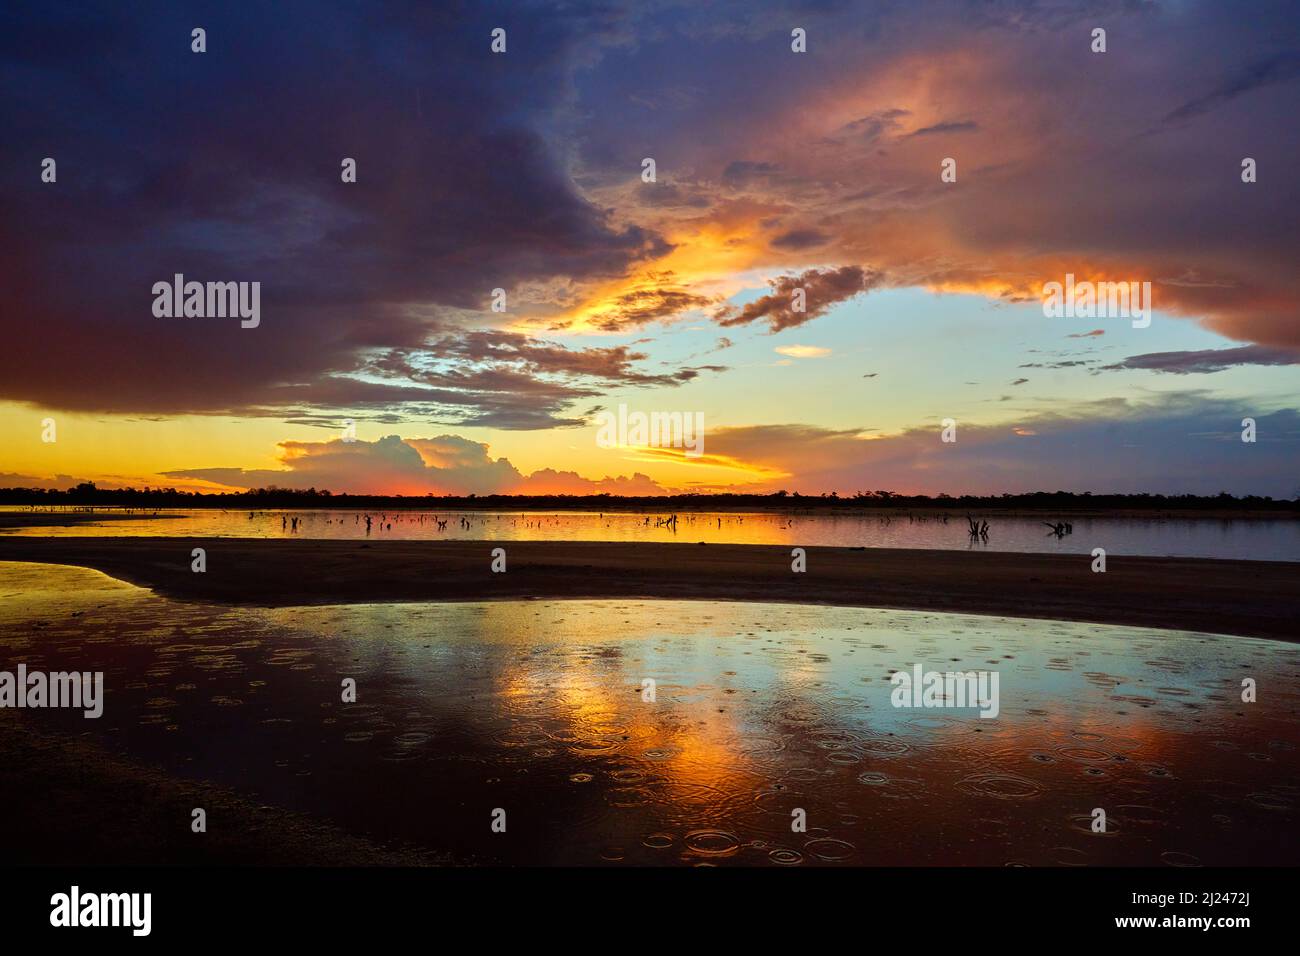 The end of a hot Summers day in far north western Victoria, with rain drops falling into a saline lake, with dramatic sunset forming the background. Stock Photo